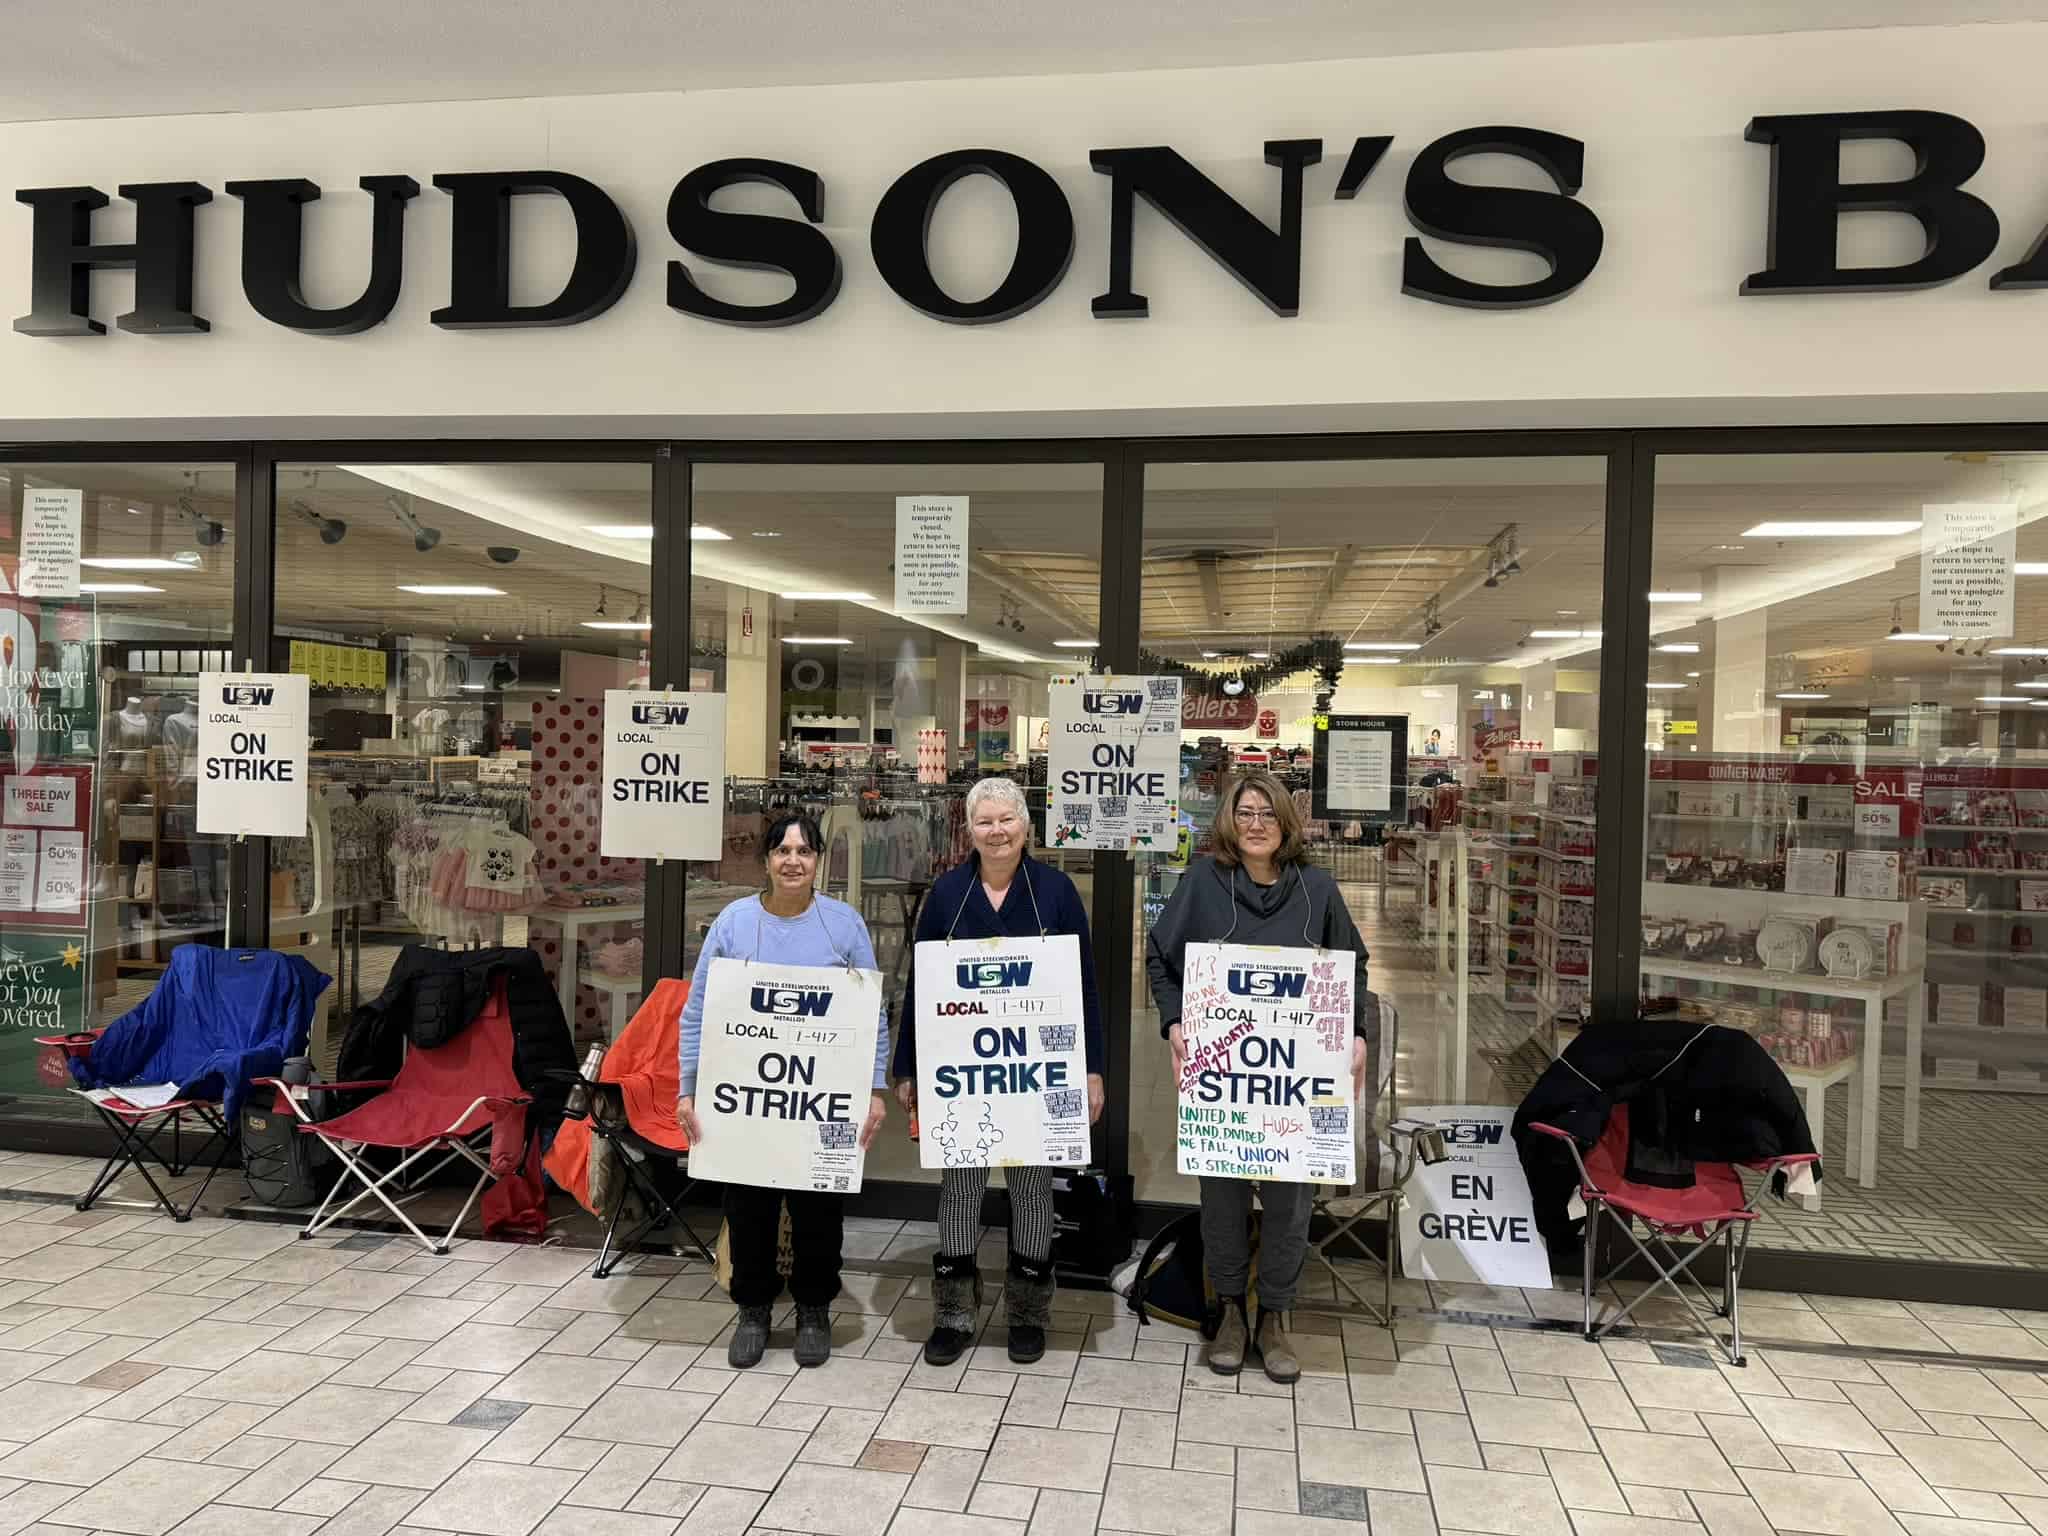 Hudson's Bay to workers: 'Go on strike forever, it's not going to change' -  USW Canada